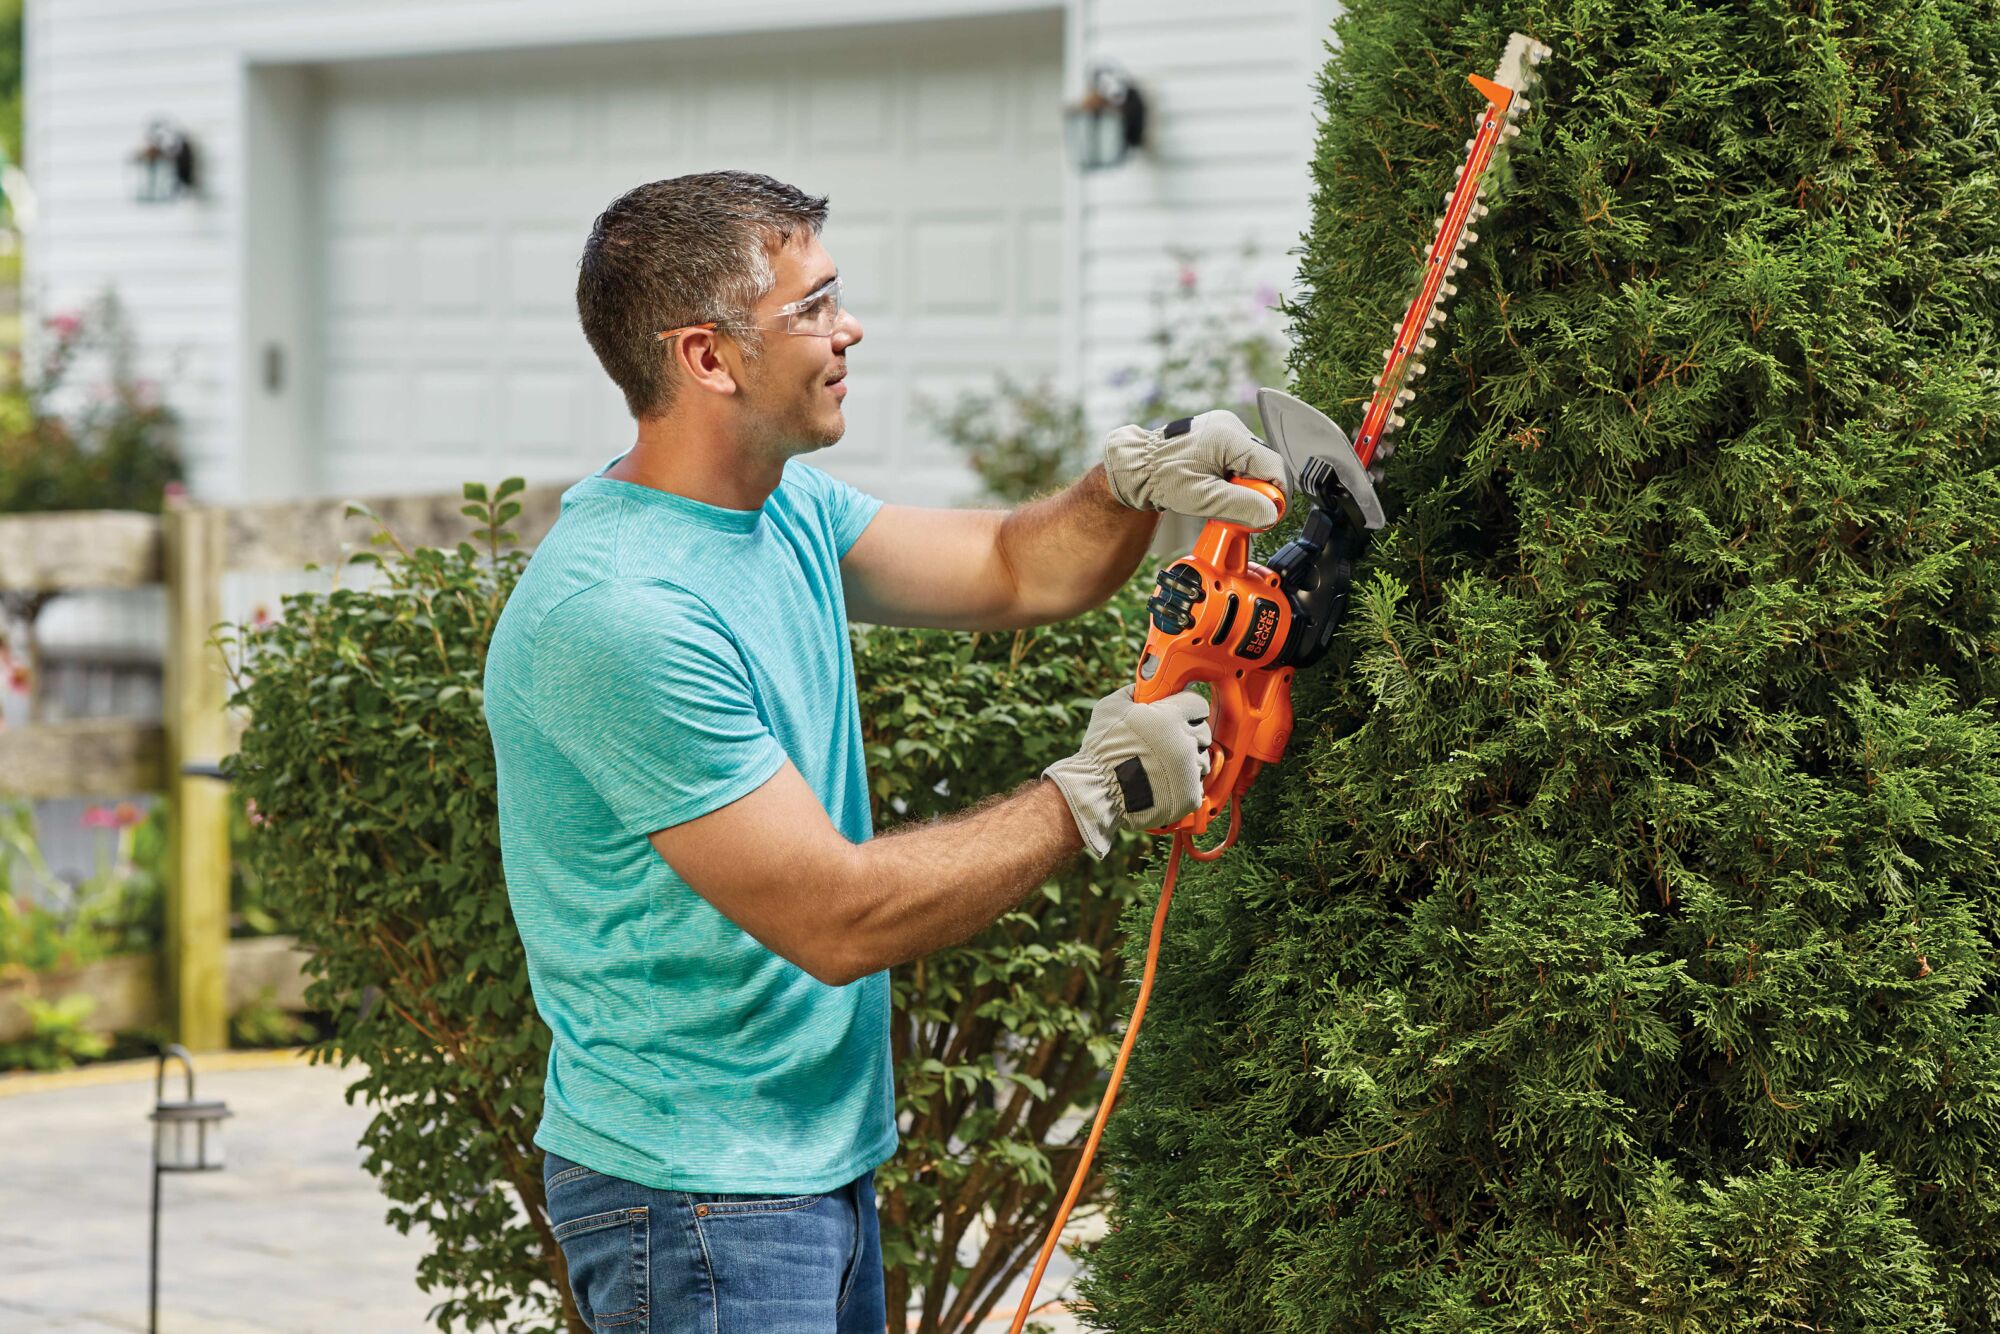 16 inch saw blade electric hedge trimmer being used to trim a tree by a person.